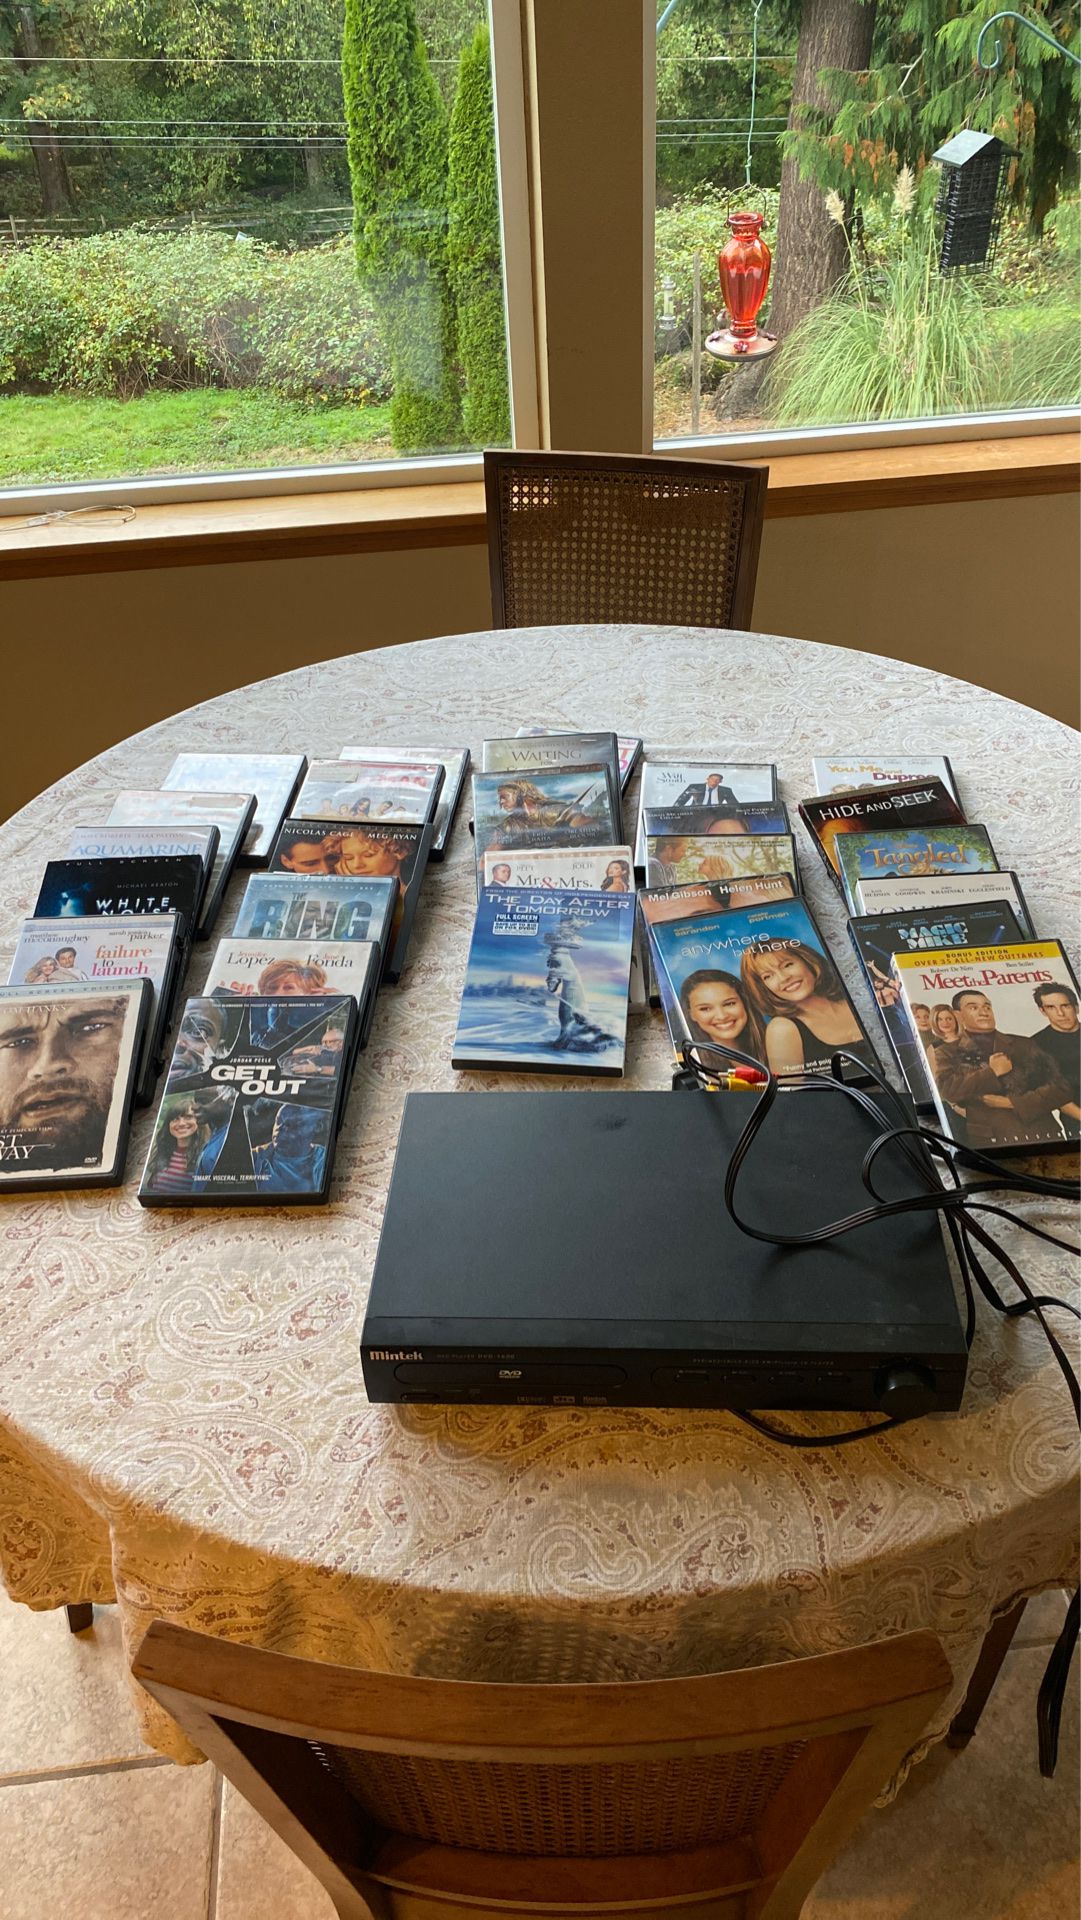 DVD player and 29 DVD’s